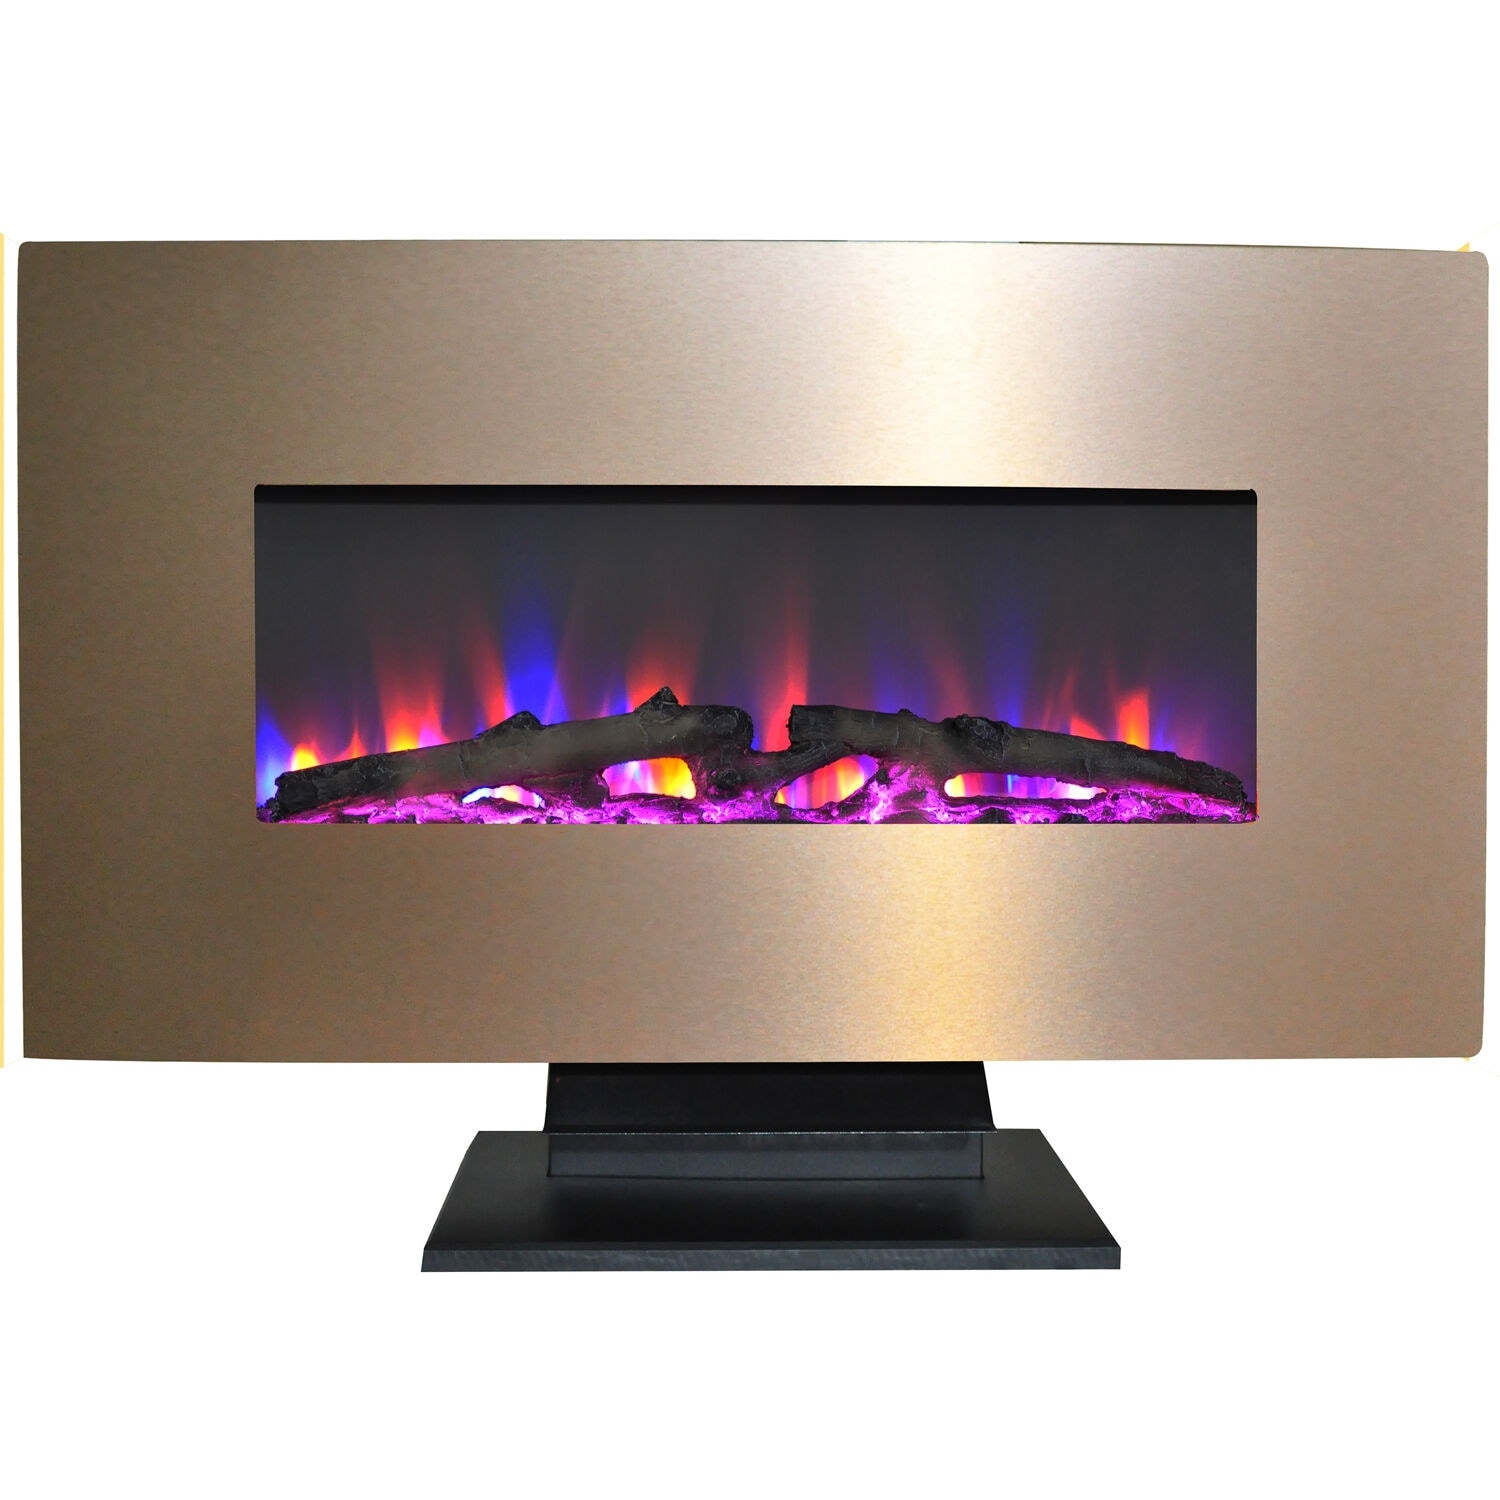 Hanover 36 In. Electric Fireplace with Multi-Color Log Display and Metallic Bronze Frame